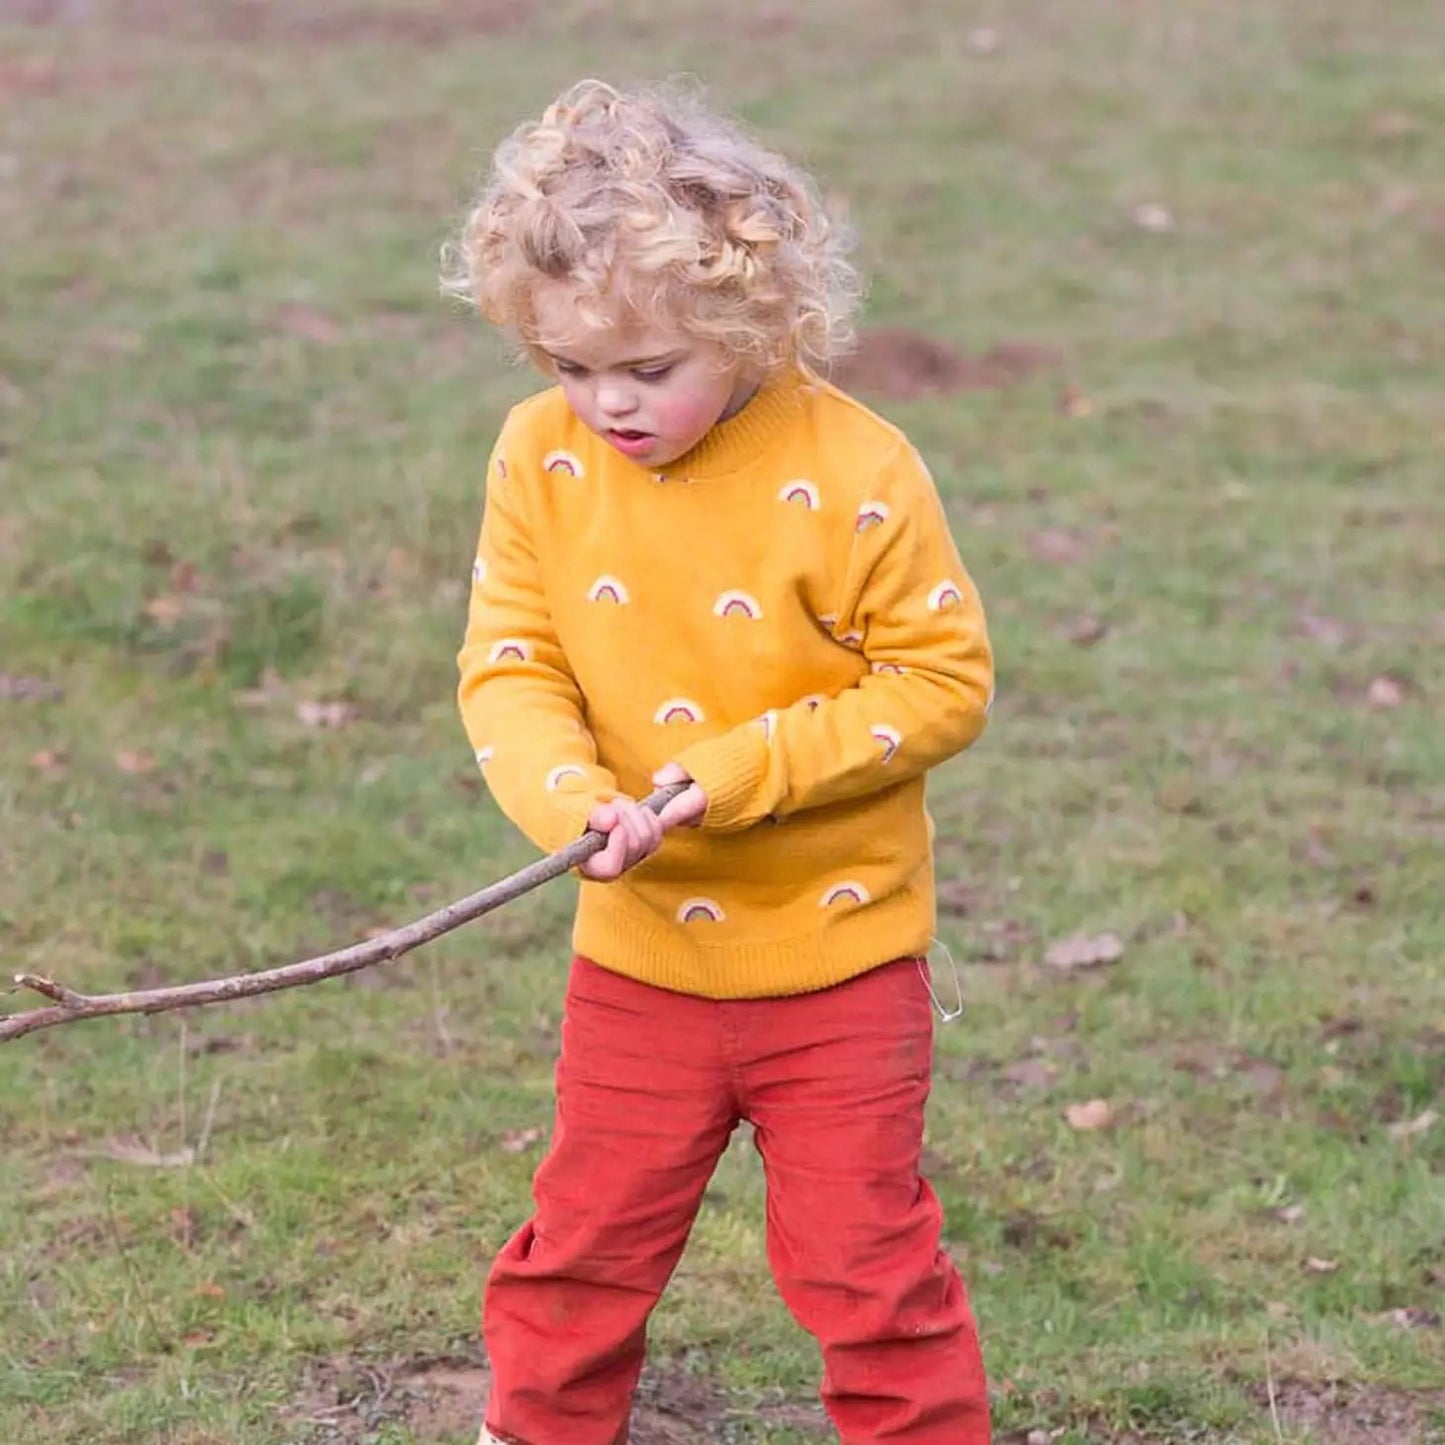 Child wearing "From One To Another" Rainbows Sweater and holding a stick